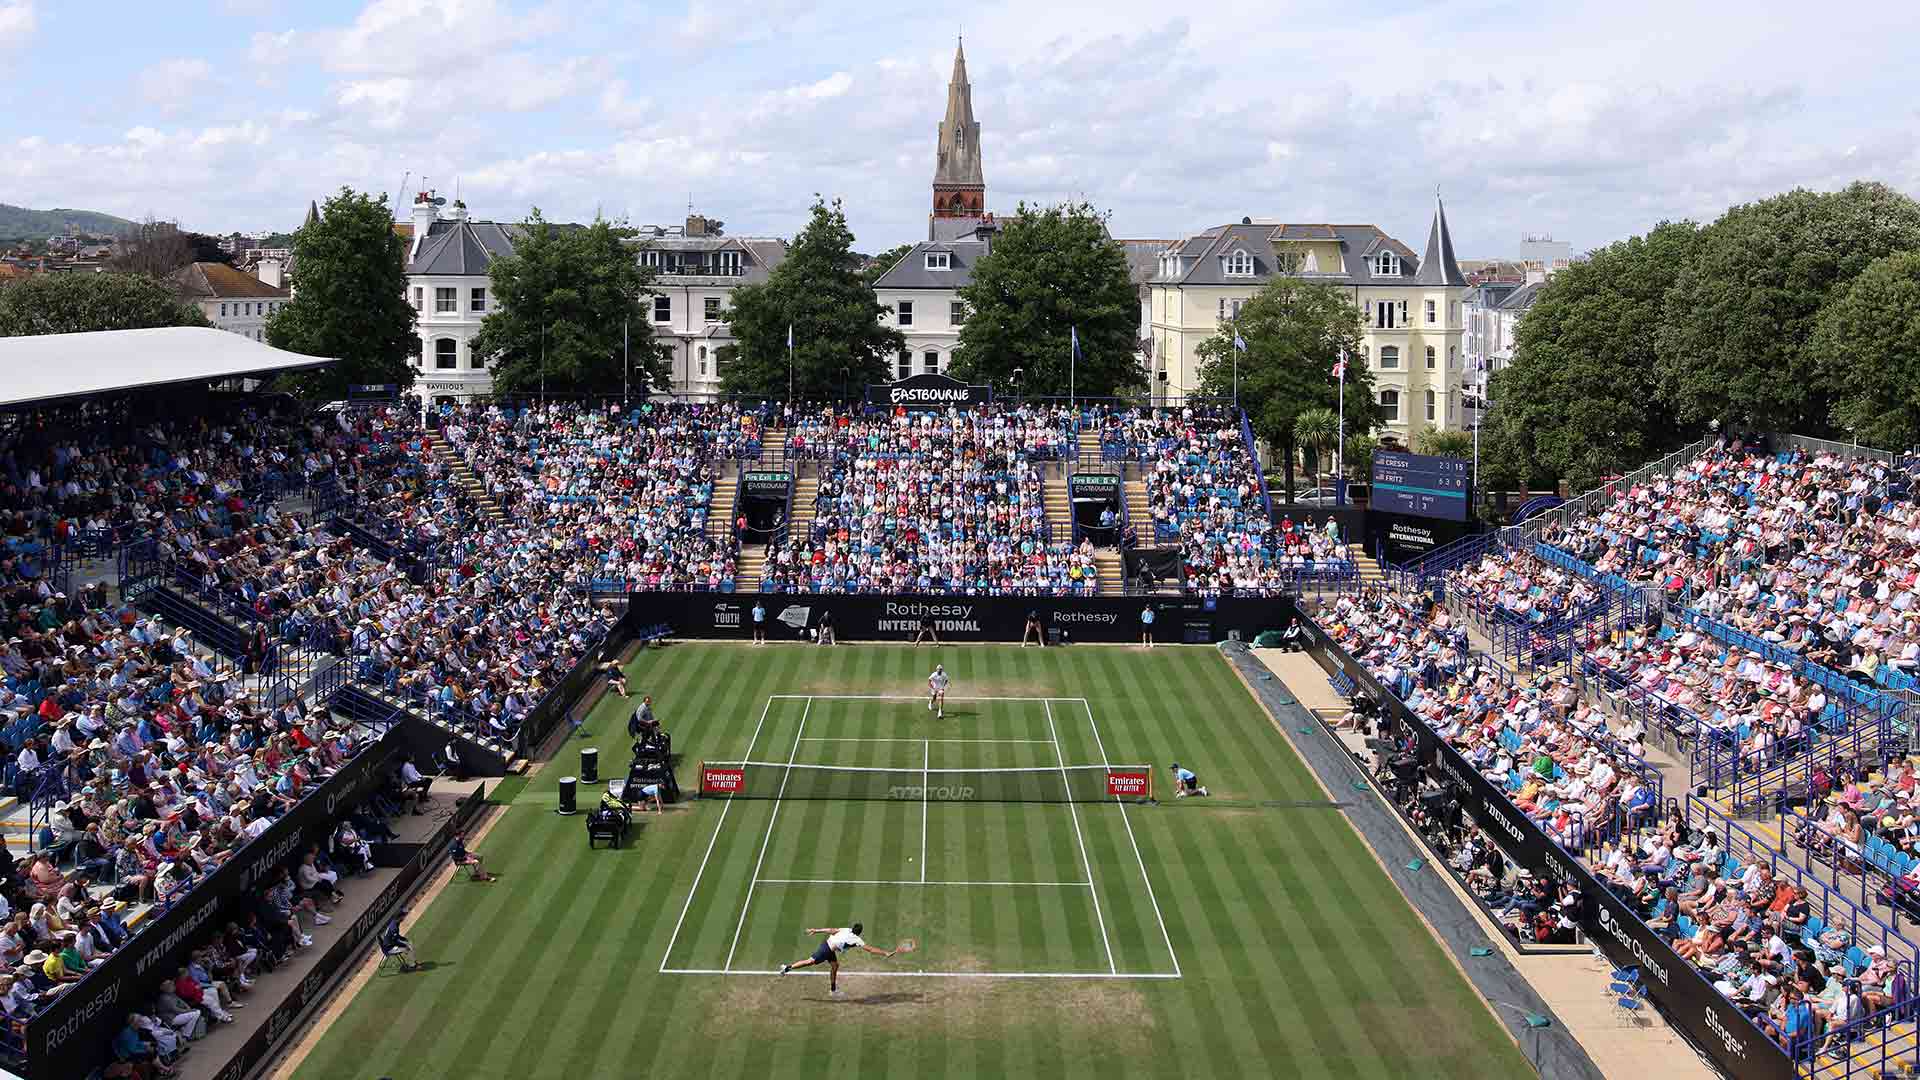 Rothesay International: A Thrilling Showcase of Women's Tennis Talent 19 to 25 June 2023